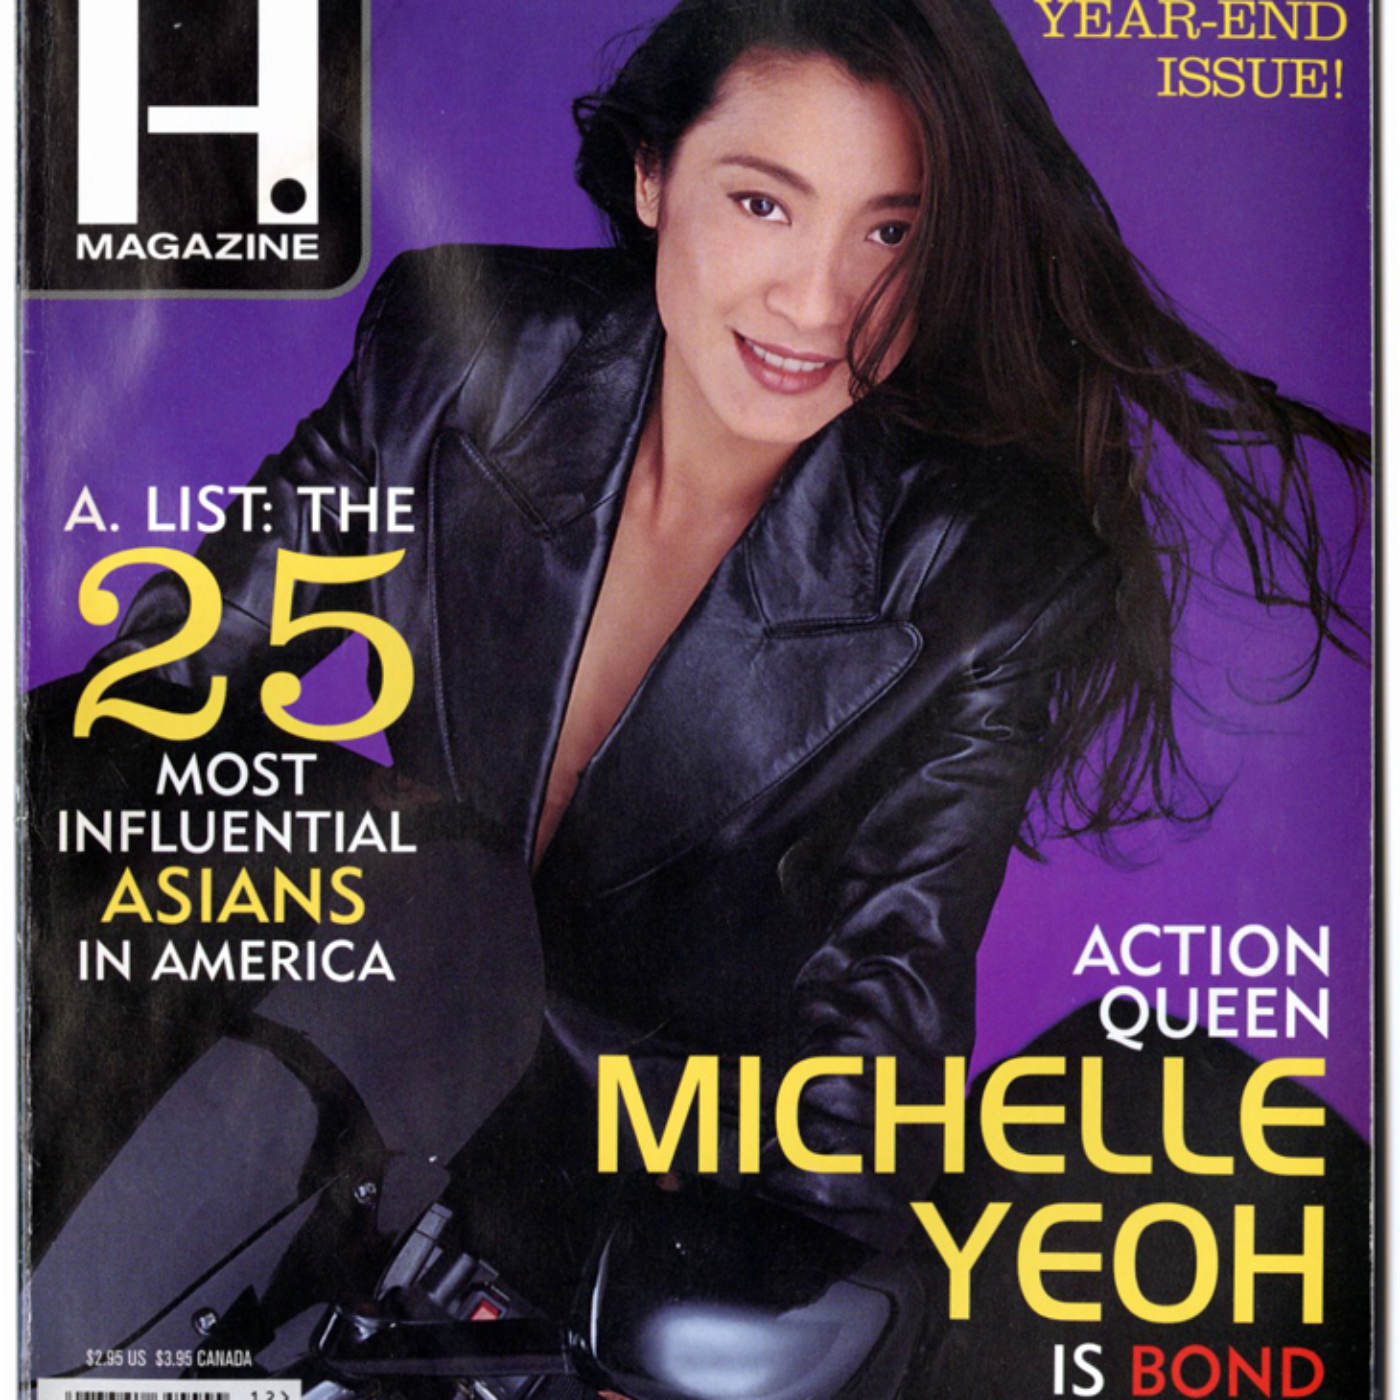 2010.013.066 A. Magazine issue featuring a cover story on Michelle Yeoh for her role as a new type of "Bond girl"--not a "shrinking violet" in need of rescue but a strong female lead able to hold her own alongside 007 in "Tomorrow Never Dies," Dec. 1997/Jan. 1998. Museum of Chinese in America (MOCA) Collection.